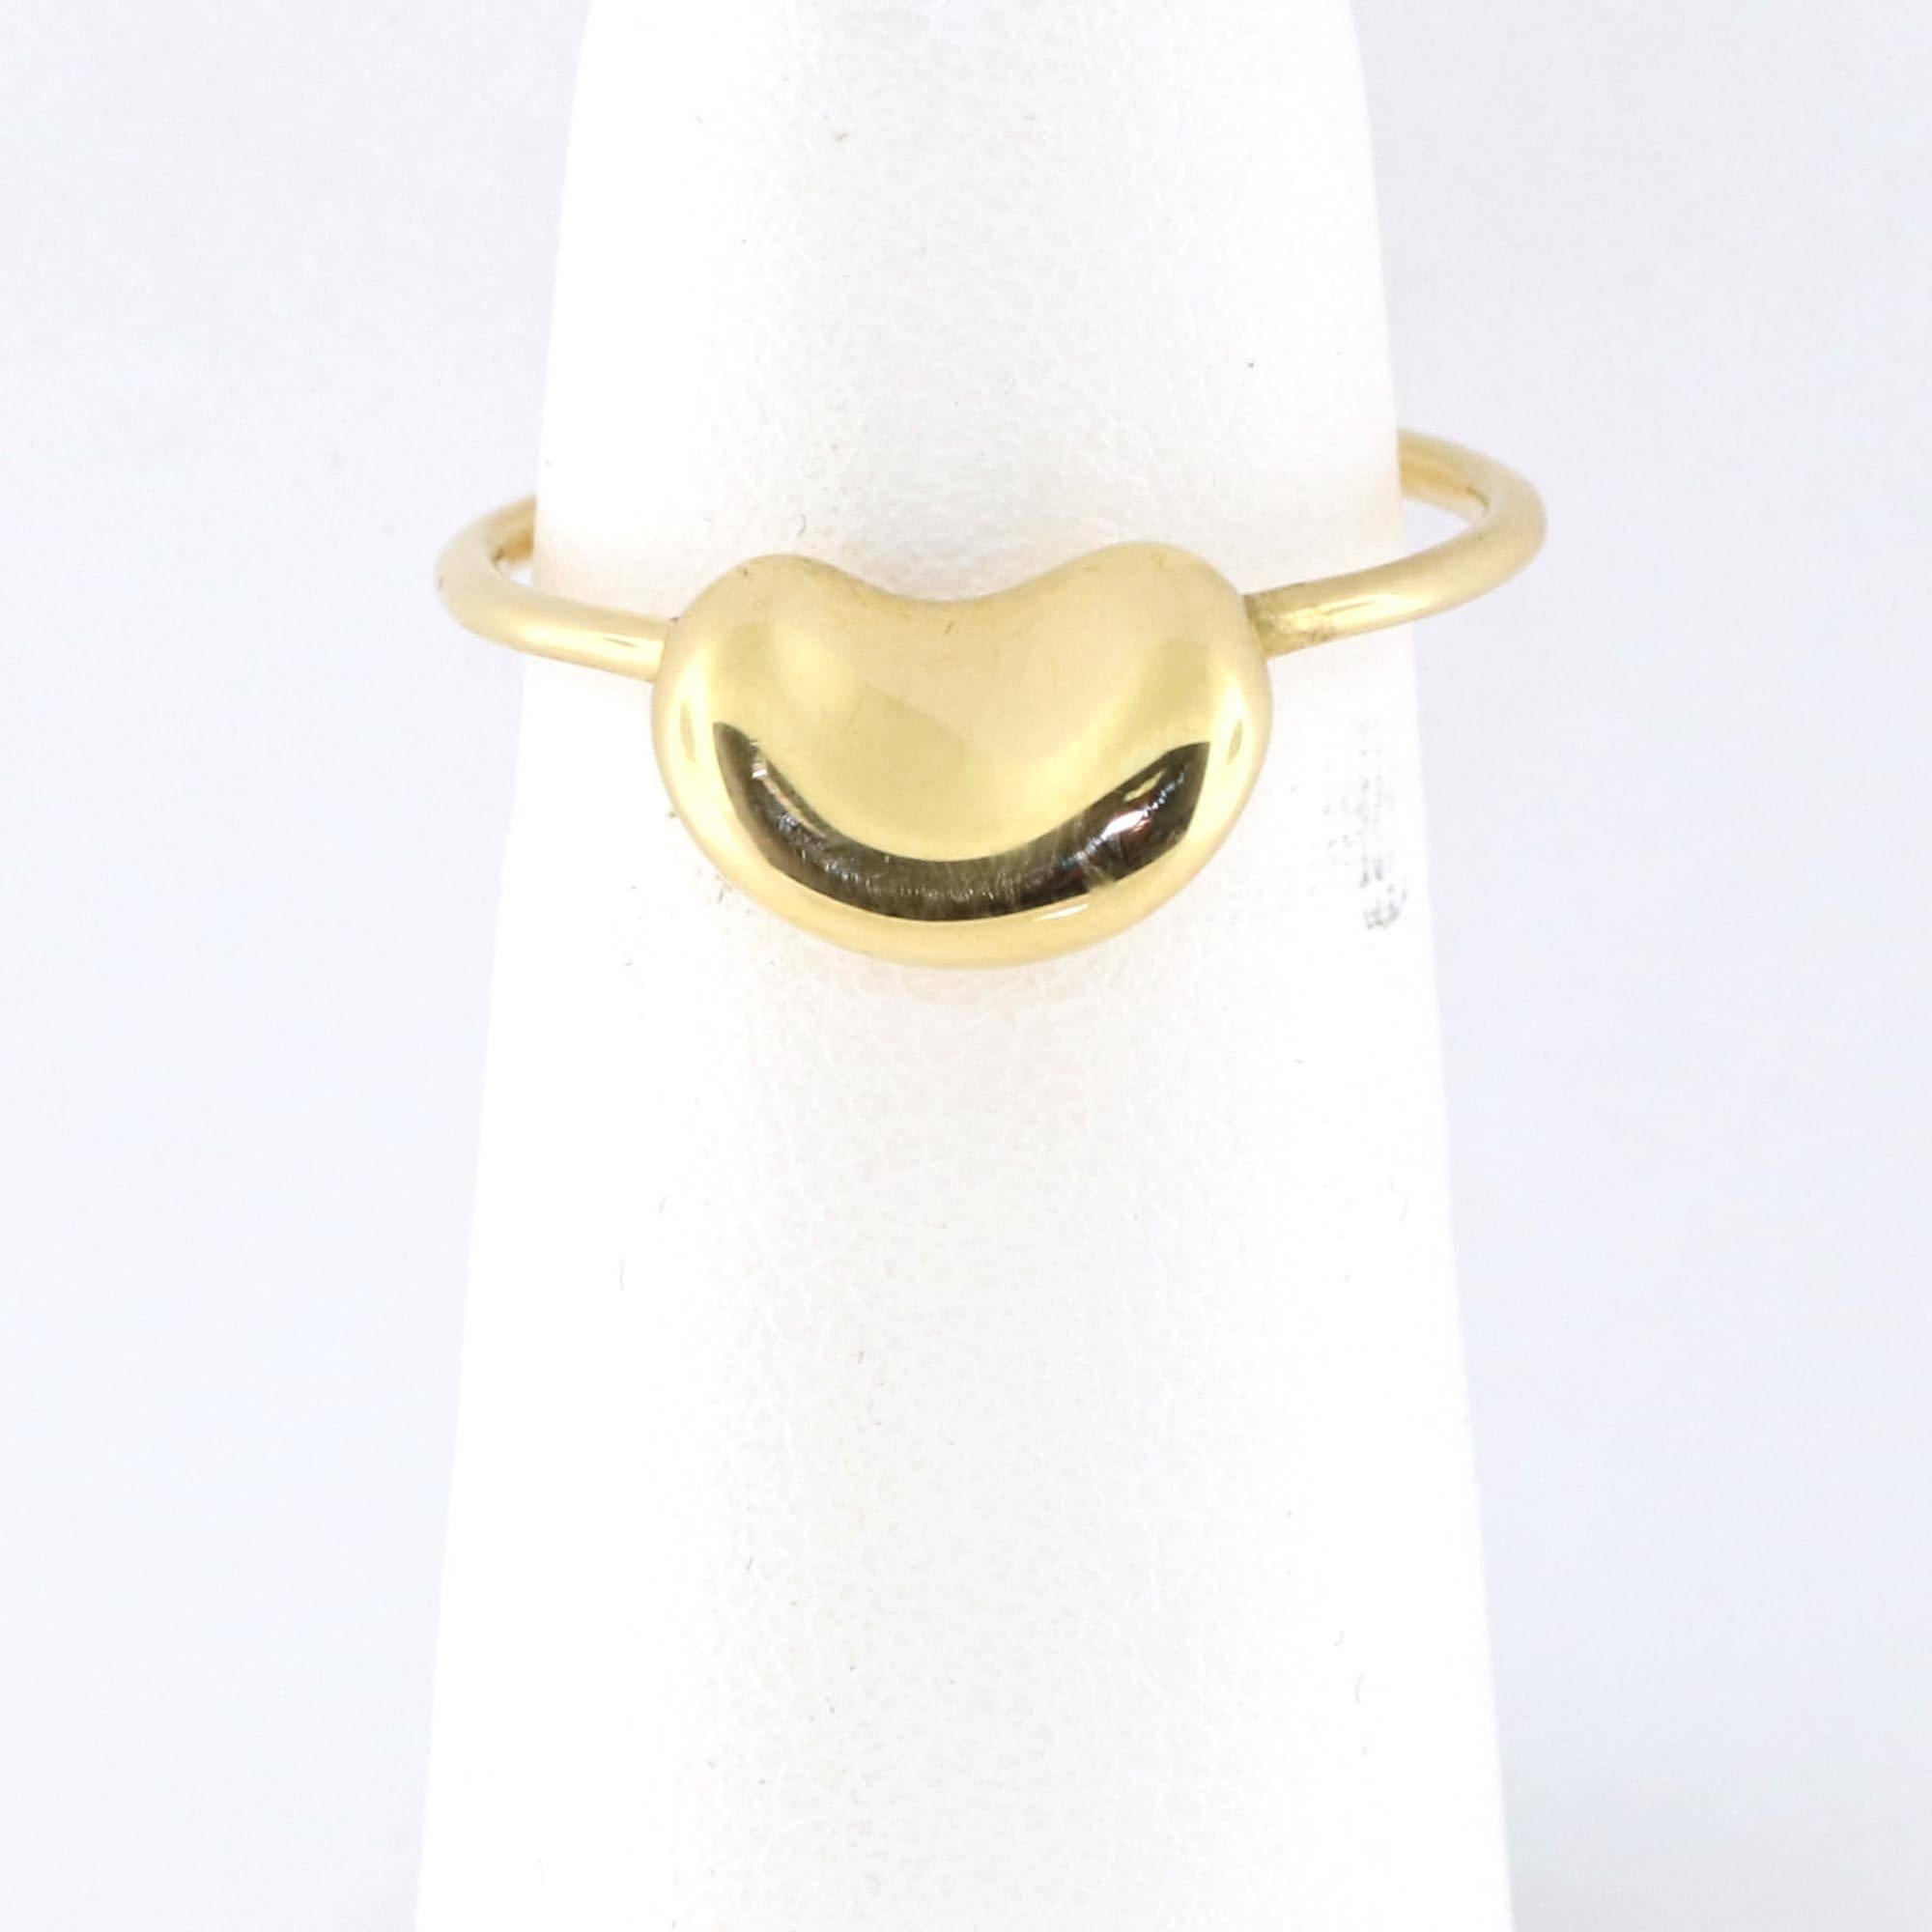 Tiffany & Co. Elsa Peretti 18k Yellow Gold Mini Bean Ring Size 5.5
This elegant bean ring is from the house of Tiffany & Co. designed by Elsa Peretti, it is well crafted from solid 18k yellow gold with a polished finish and boast a high polished